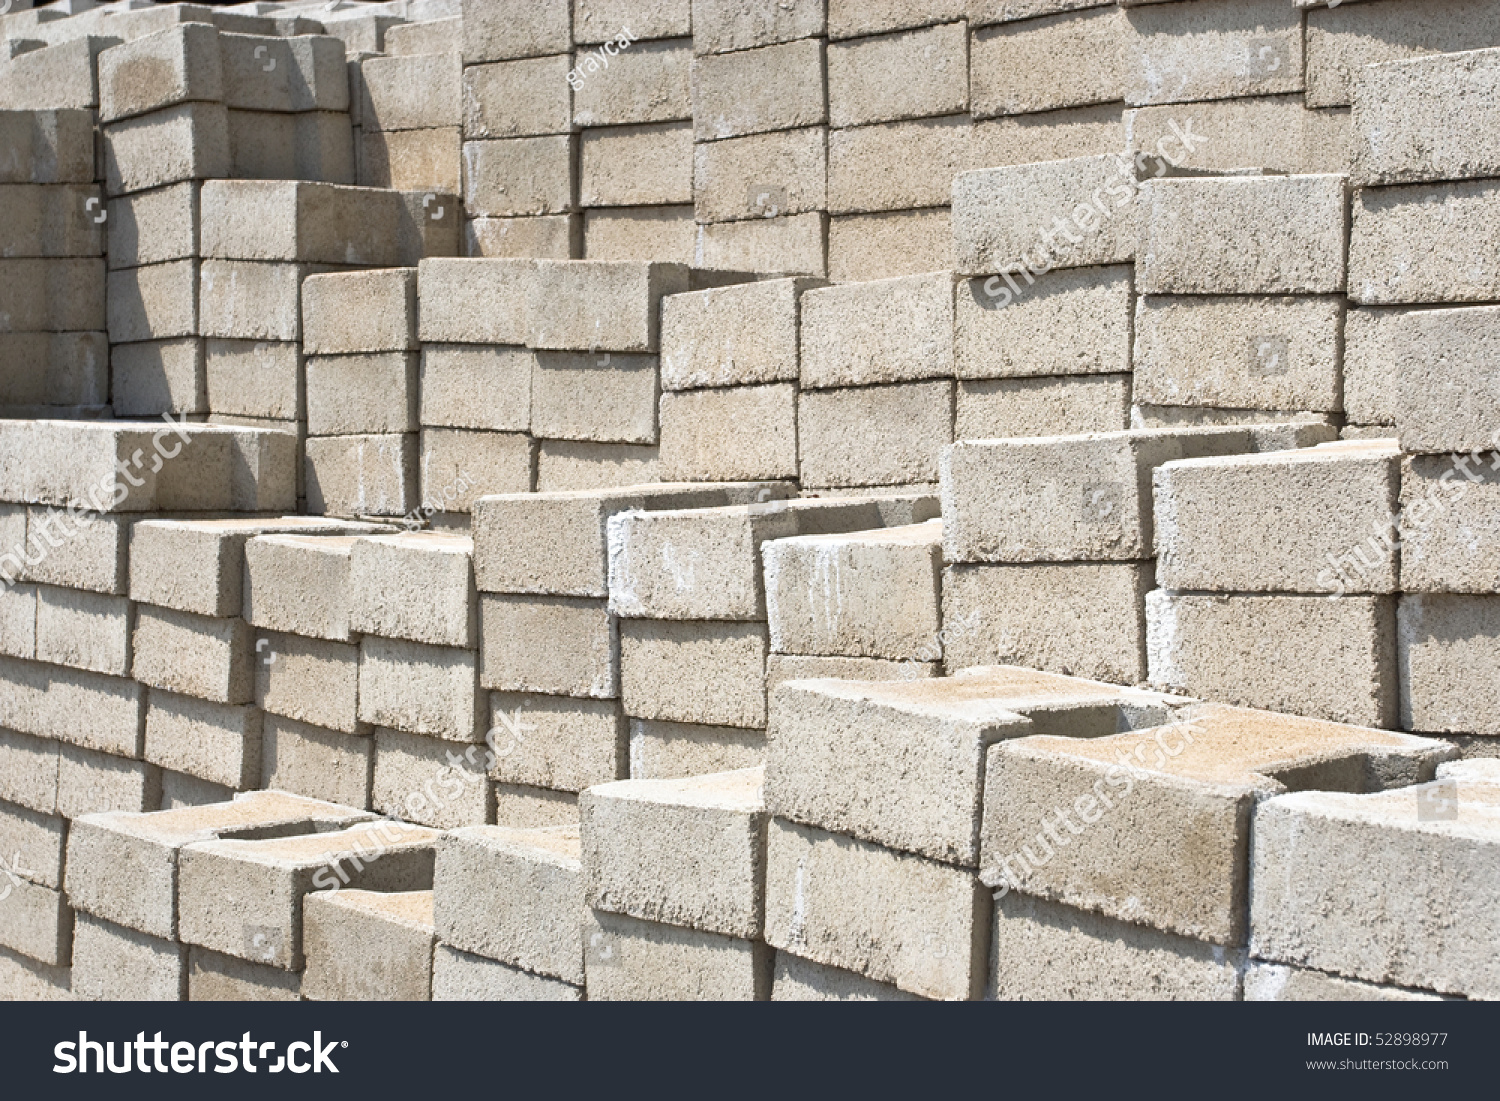 Cement Block In A Factory. Stock Photo 52898977 : Shutterstock